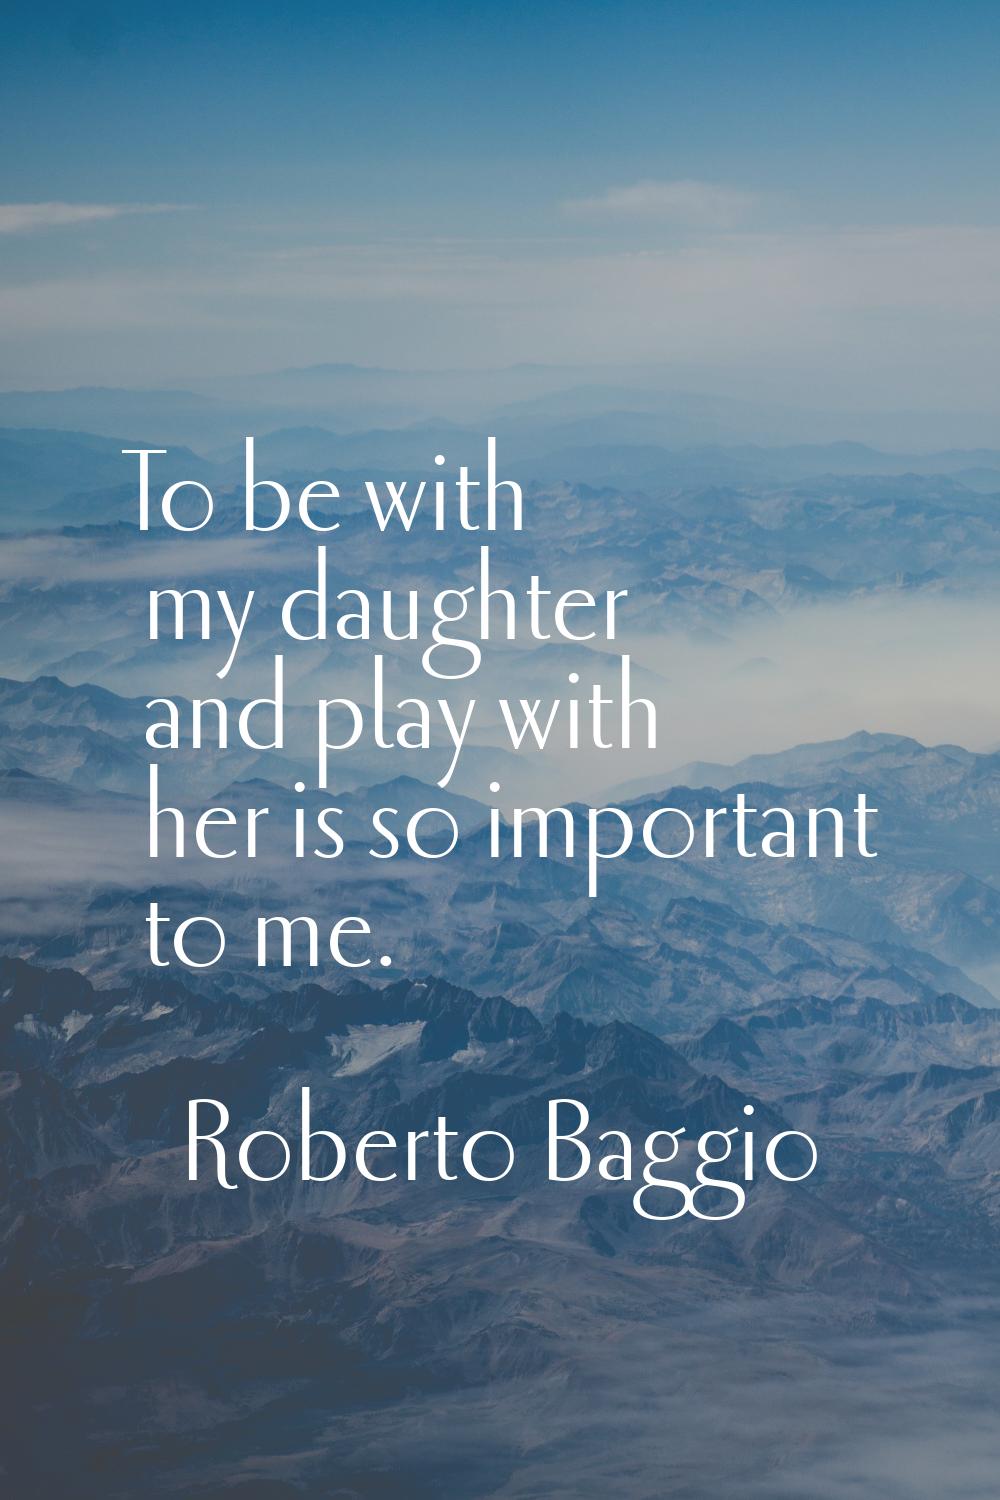 To be with my daughter and play with her is so important to me.